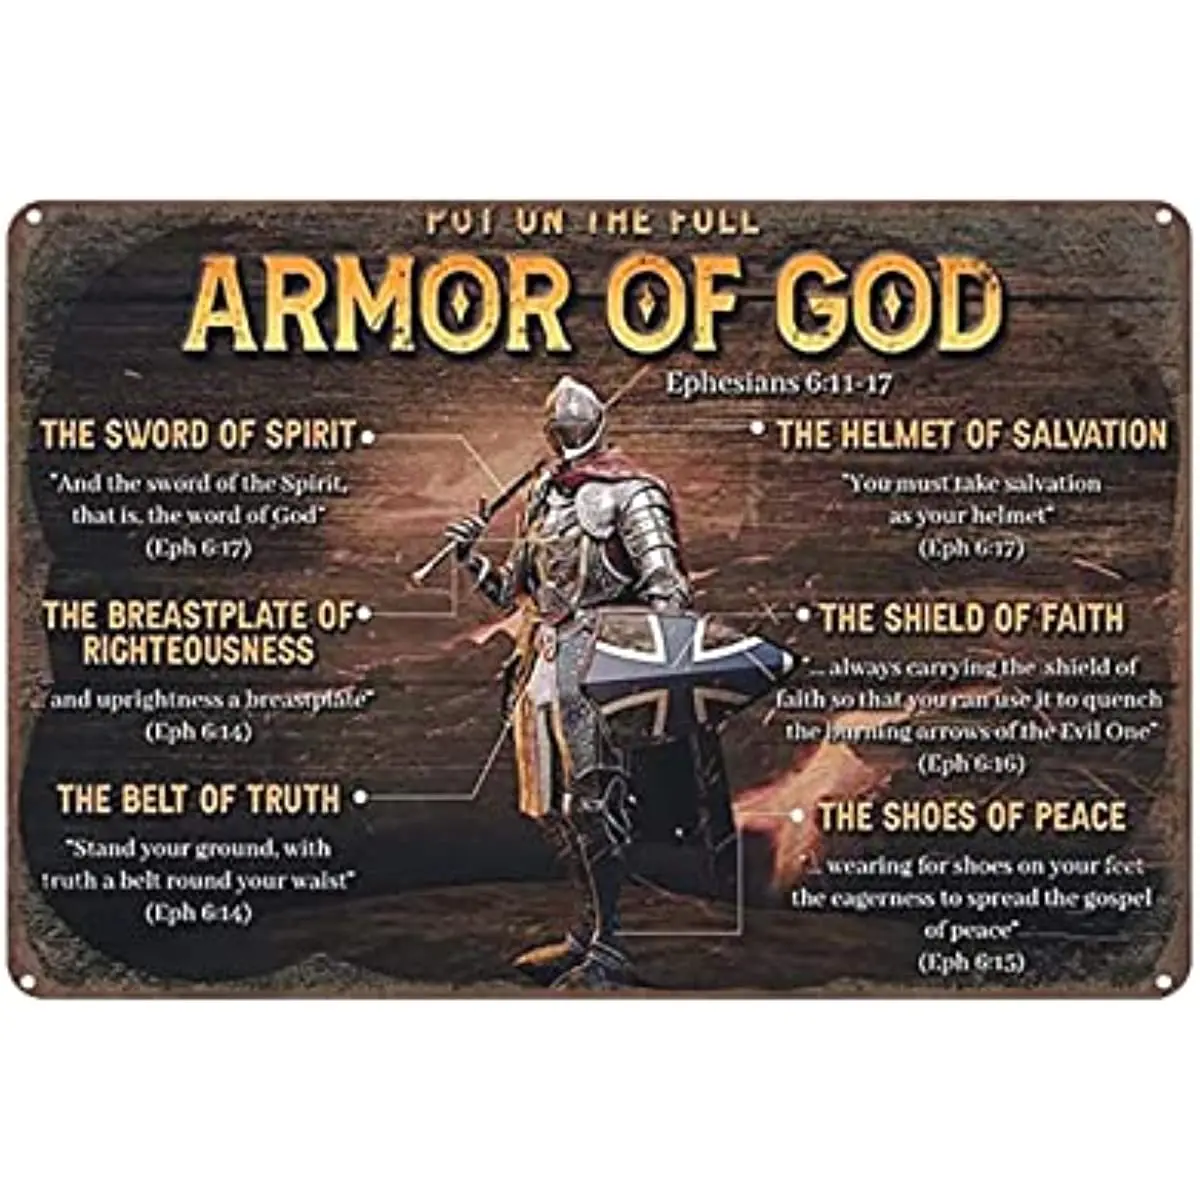 

New Metal Tin Sign Vintage Armor God Ephesians Bible Verses Christian Cafes for Home, Living Room, Garden Bedroom Office Hotel,